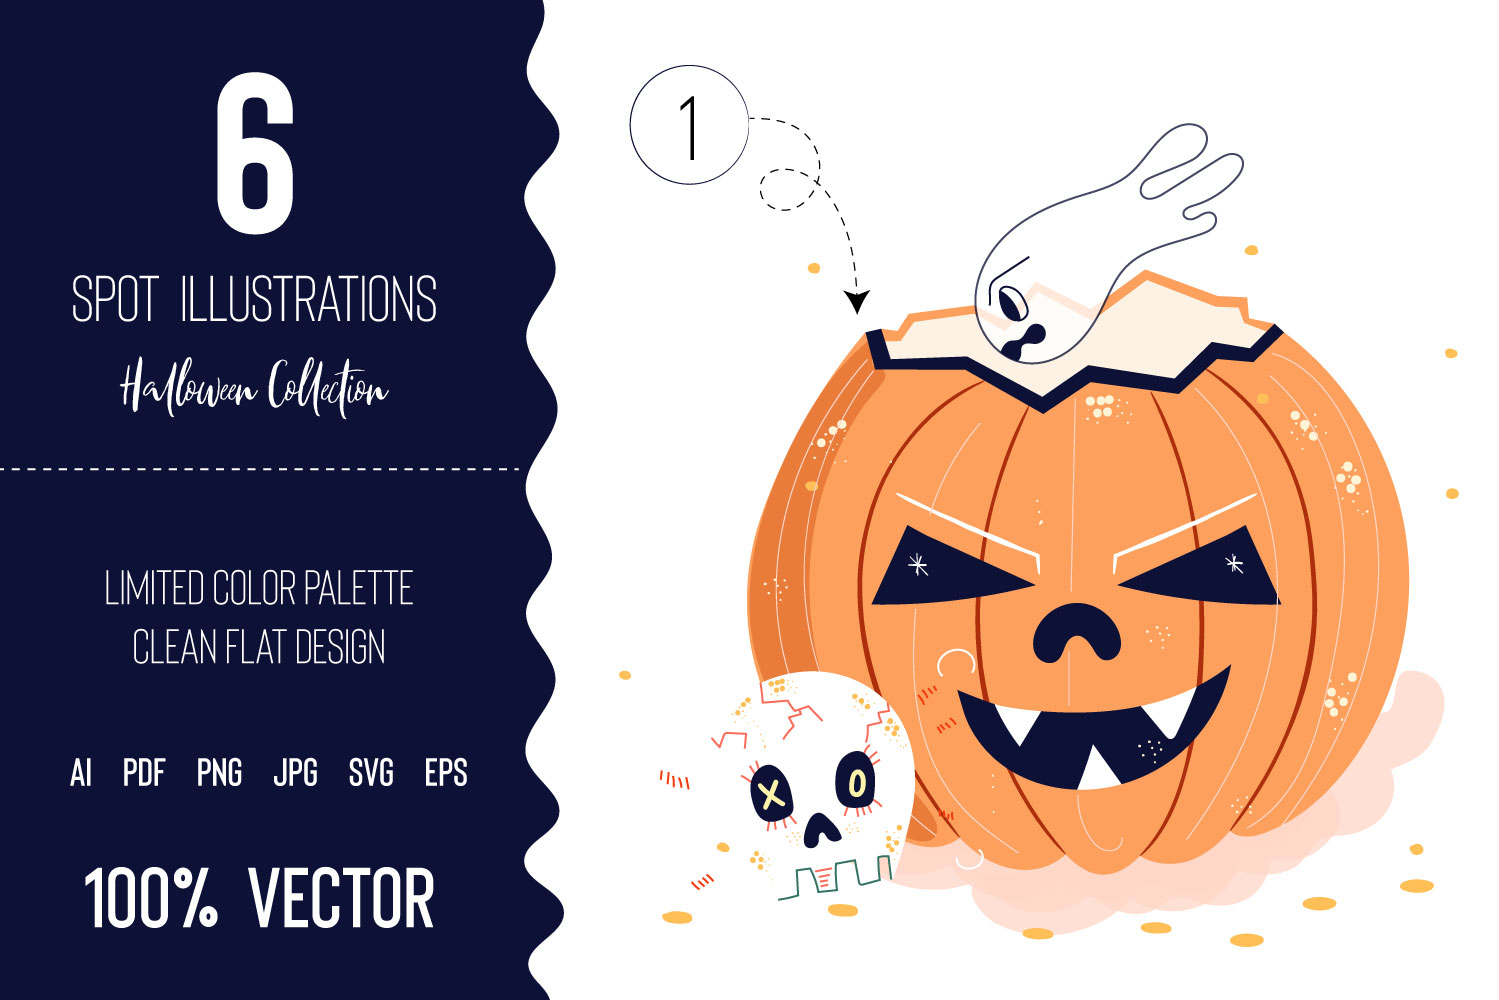 Outstanding and unique vector Halloween illustrations